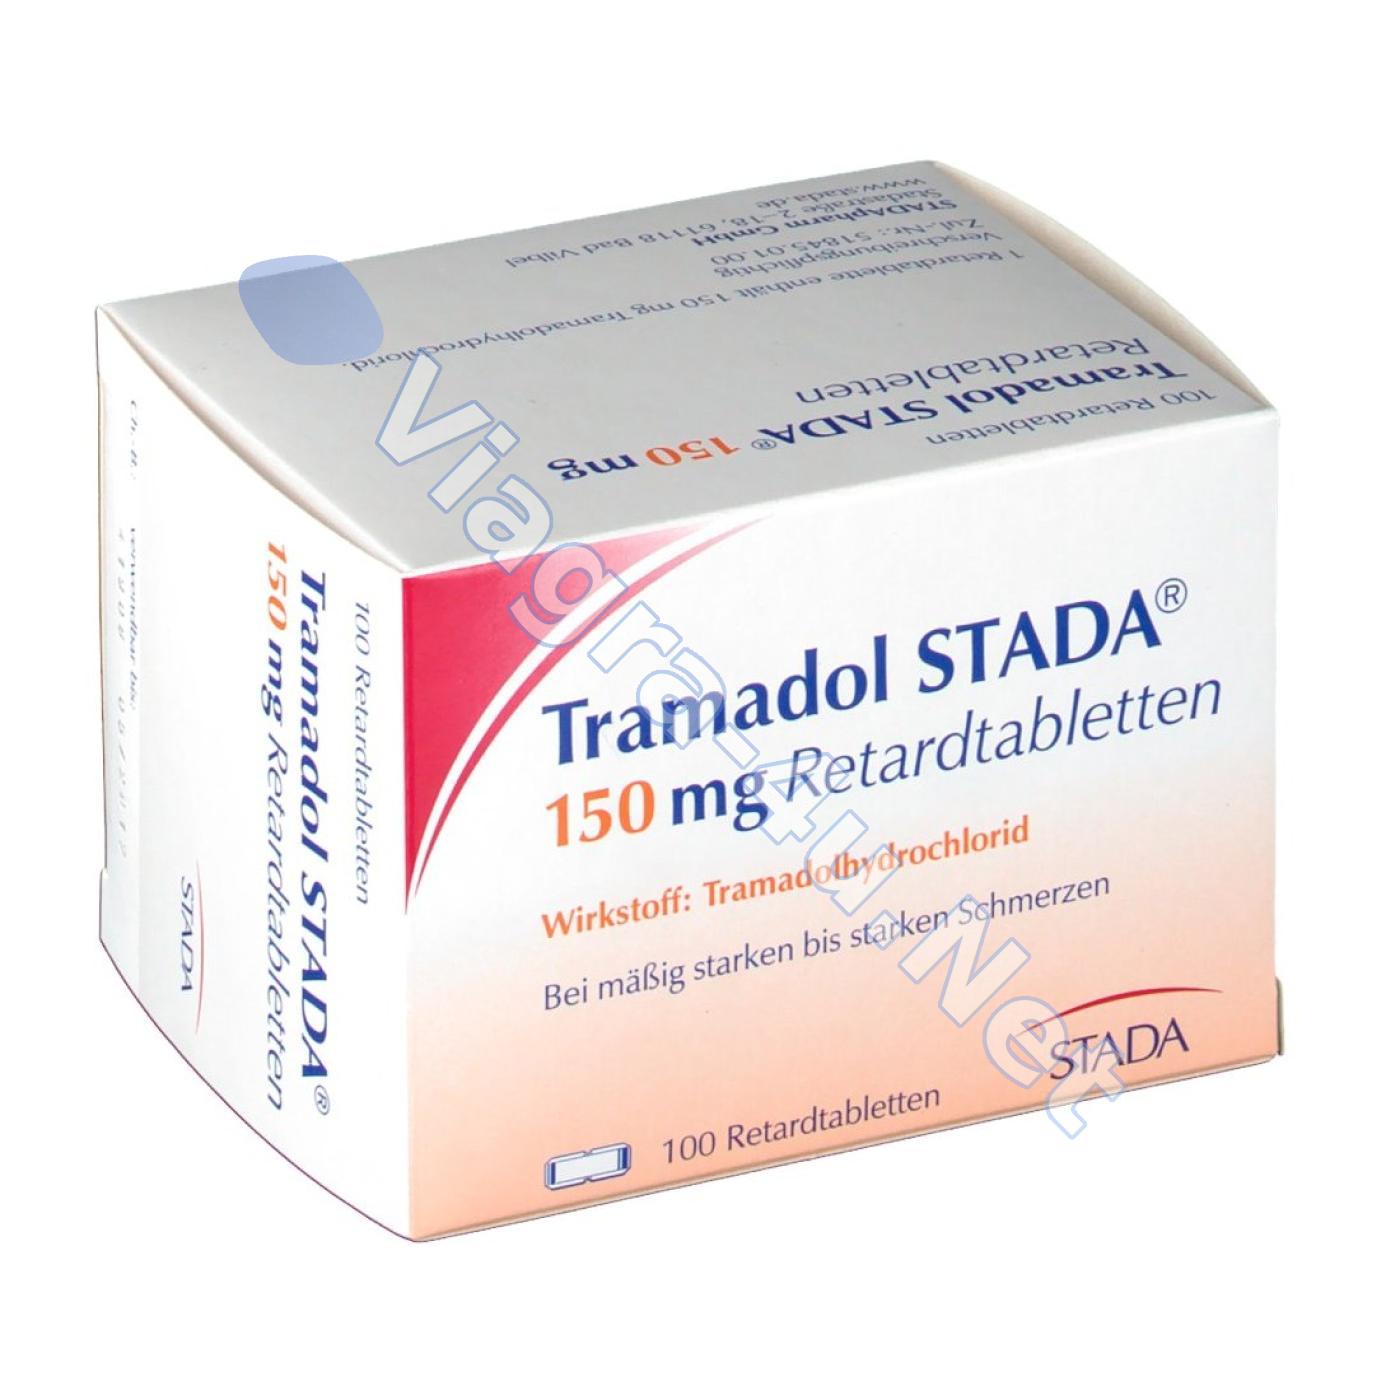 buy tramadol 100mg without script